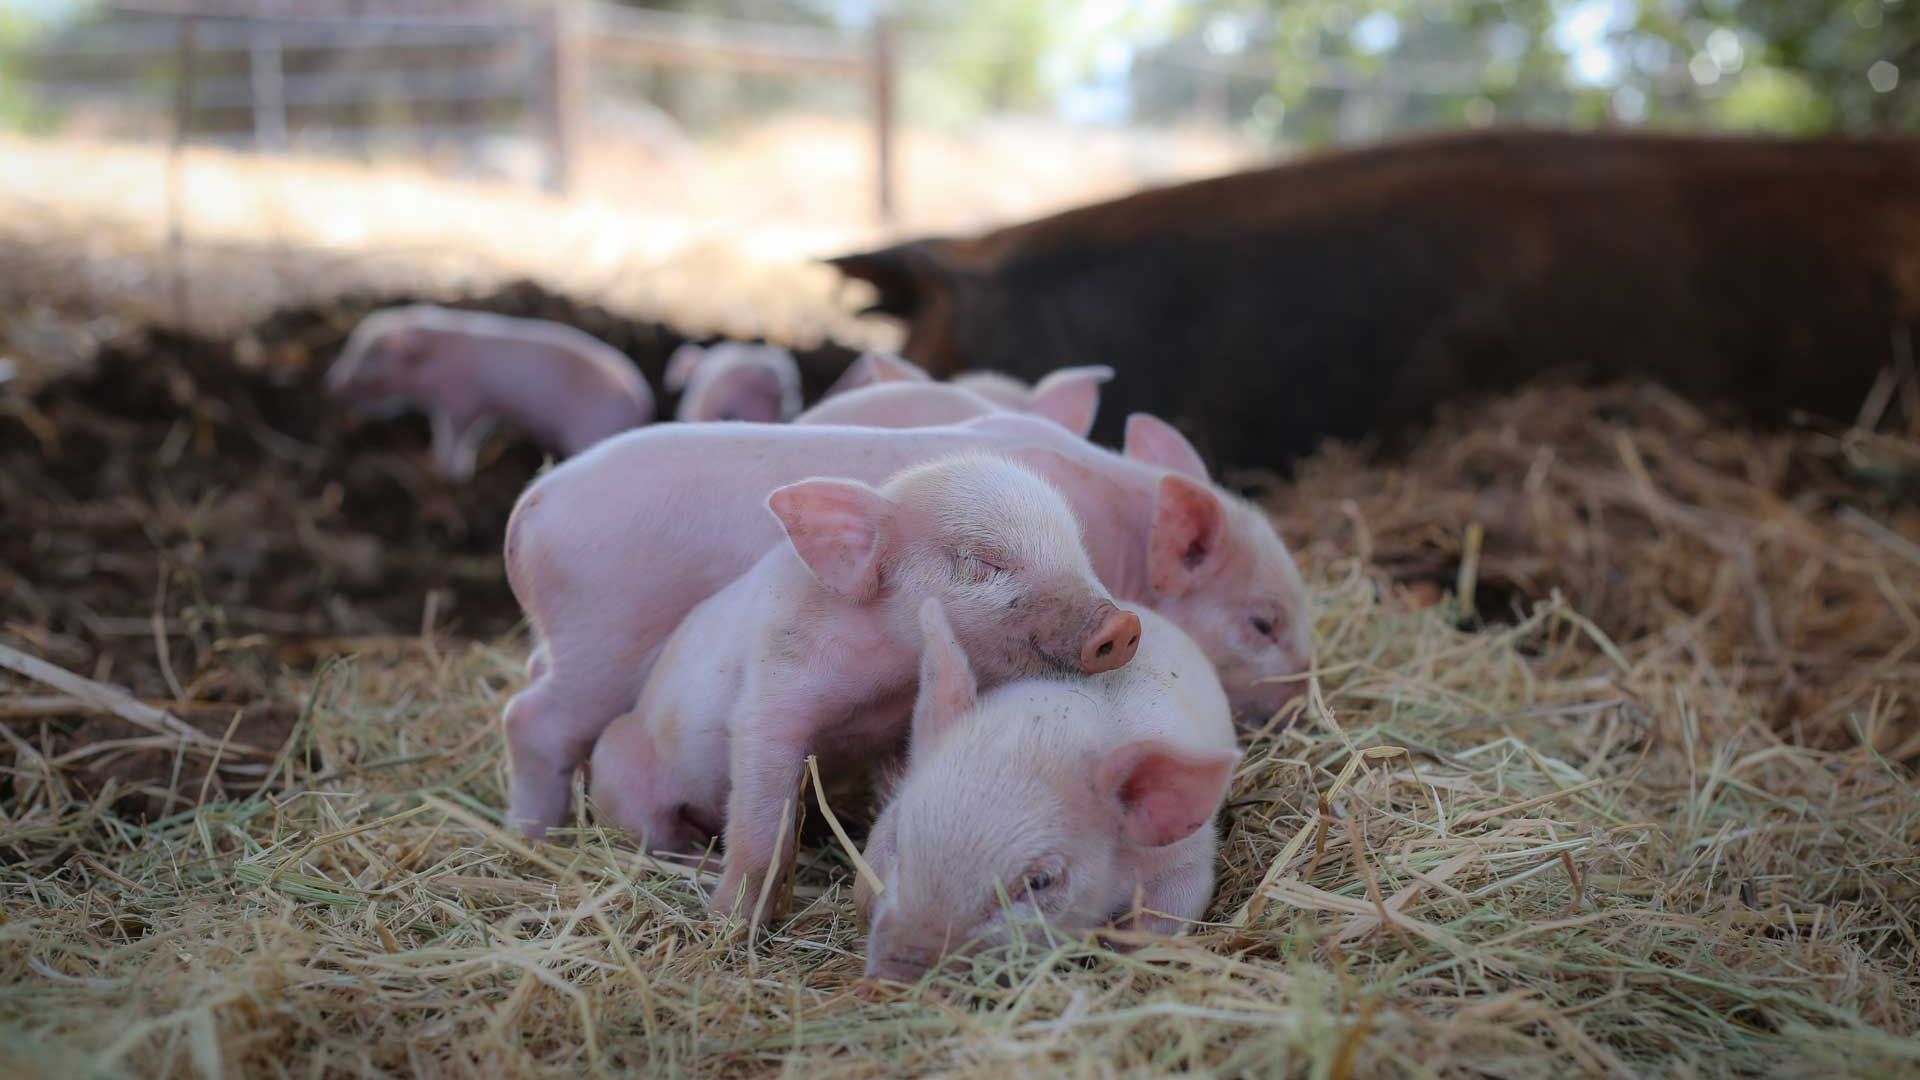 Volunteering on Vegan Farm in Northern California: Several piglets snuggled up together in the hay